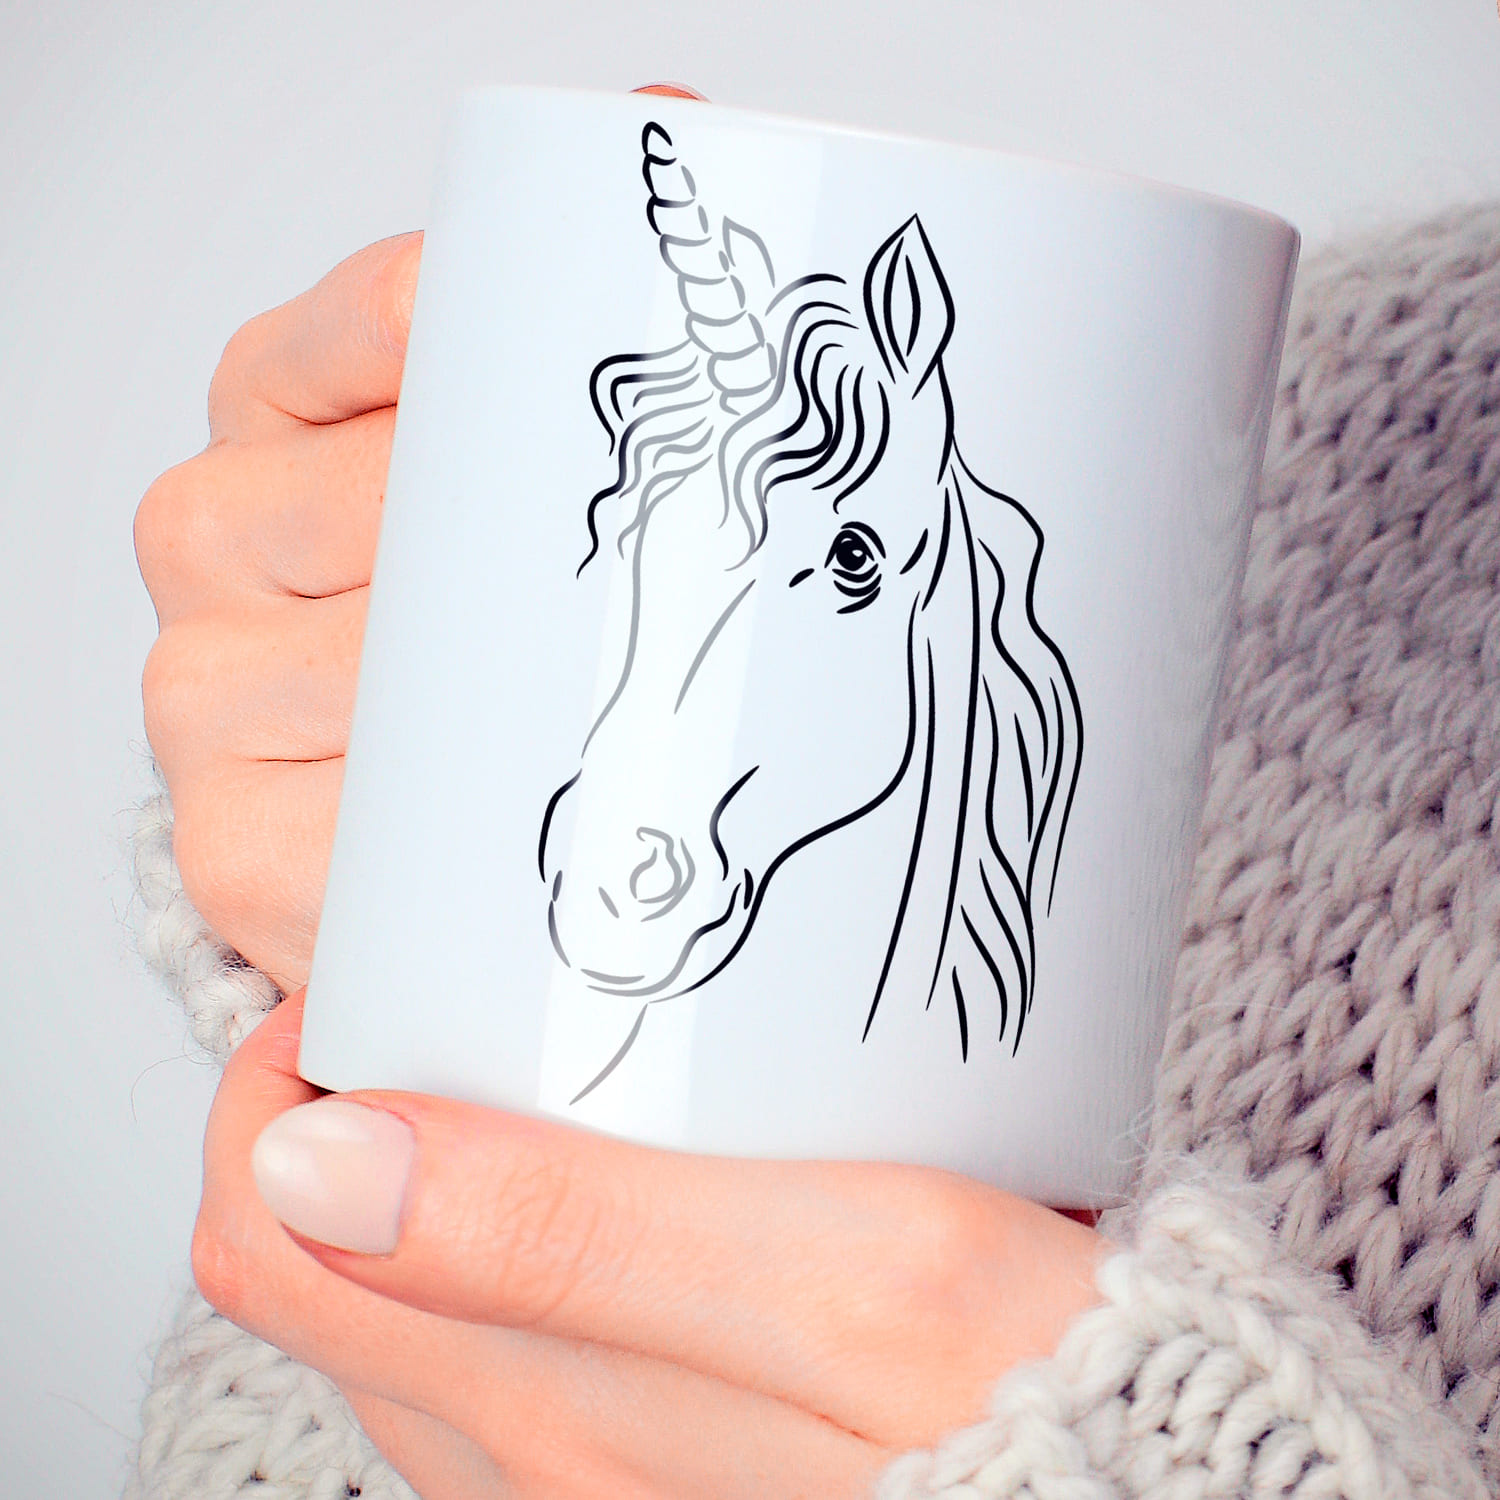 Cup with unicorn print in minimalistic style.